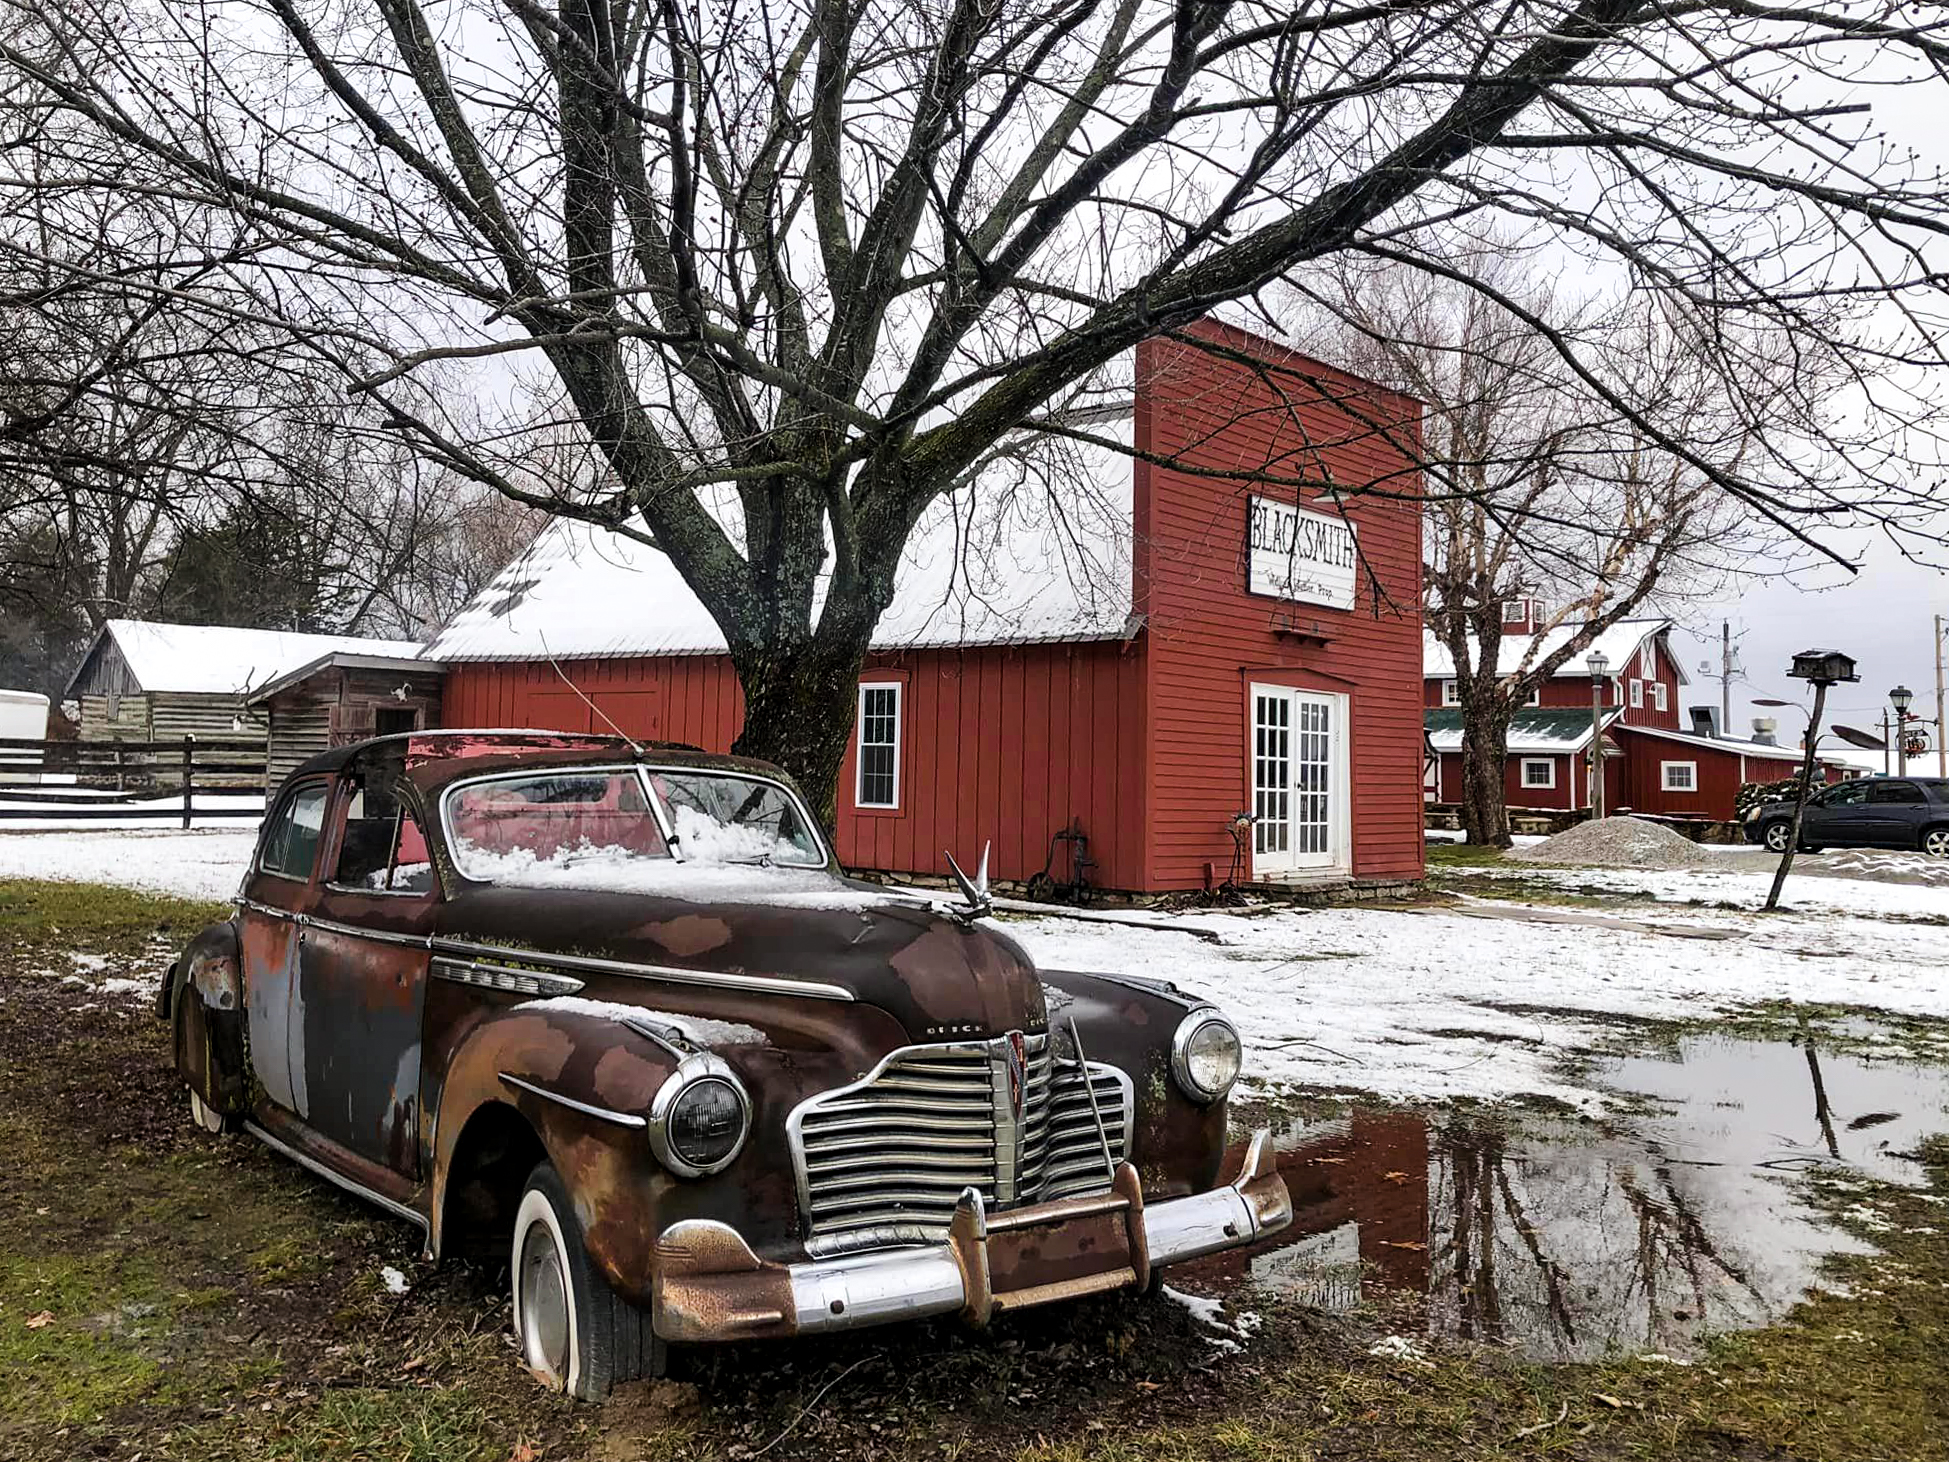 Lowell Davis’s grandfather's original blacksmith shop that Lowell had transferred to Red Oak II. Lowell Davis’s old automobile is also pictured.